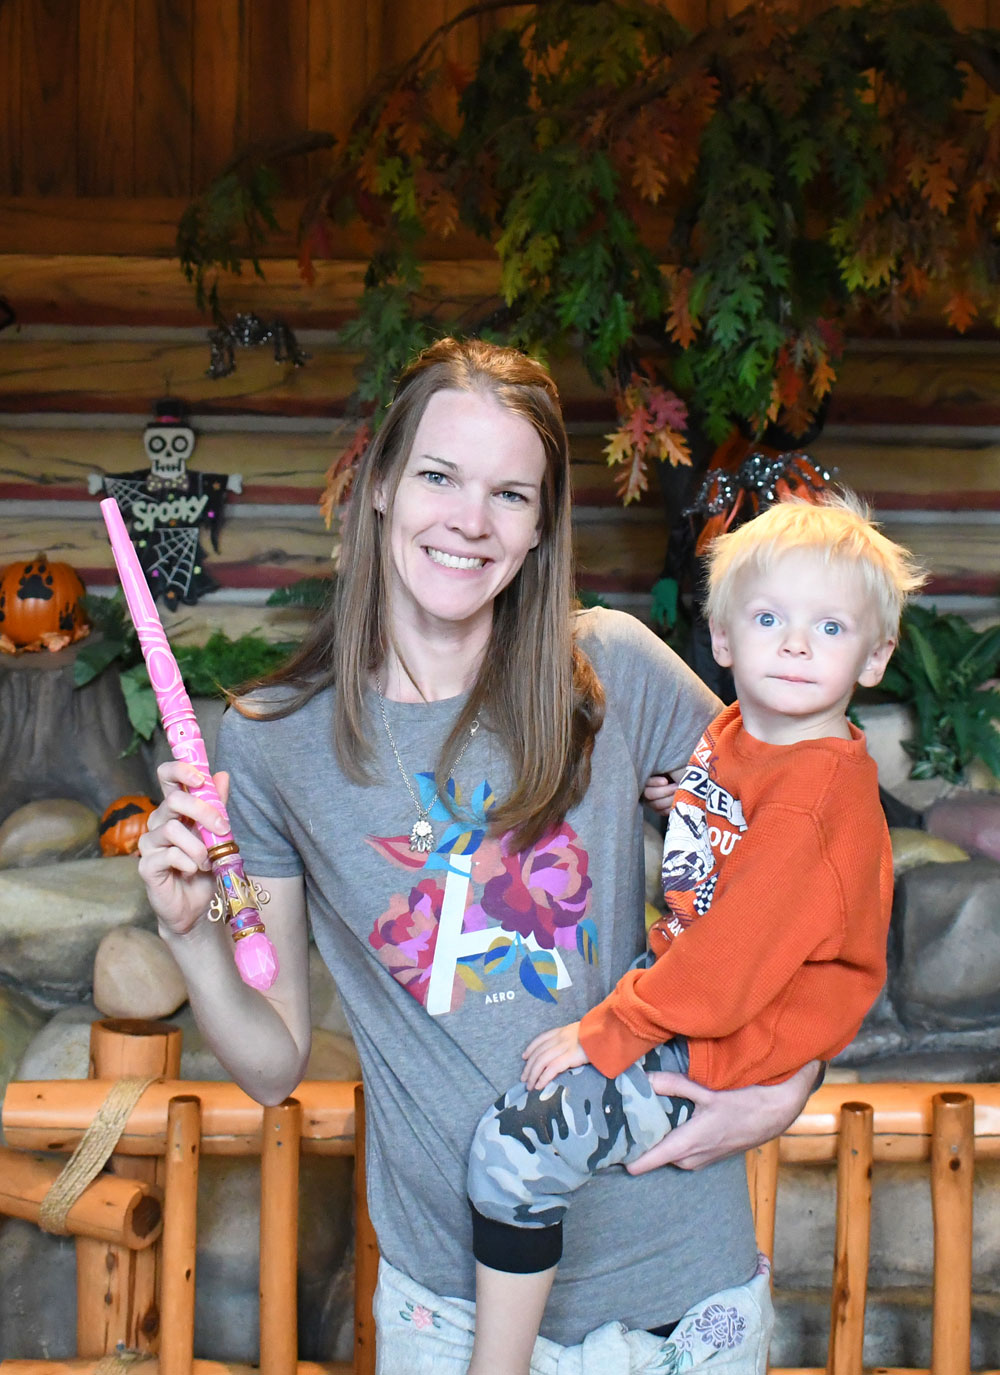 Family weekend at Great Wolf Lodge